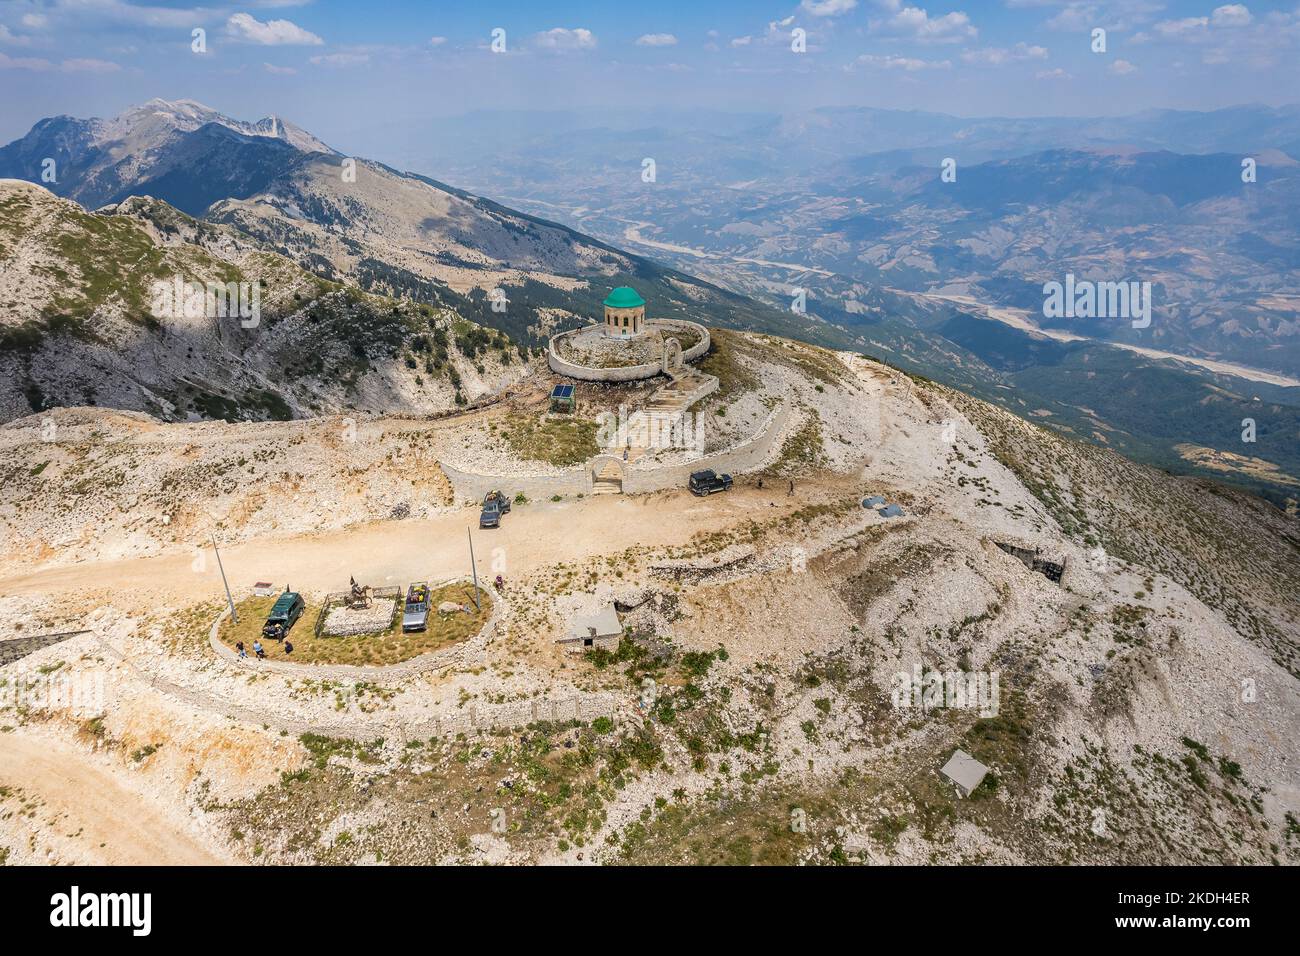 Mount Tomorr is situated within the Tomorr National Park with Shrine (tyrbe) of Abbas ibn Ali on the top in Summer, Albania Stock Photo